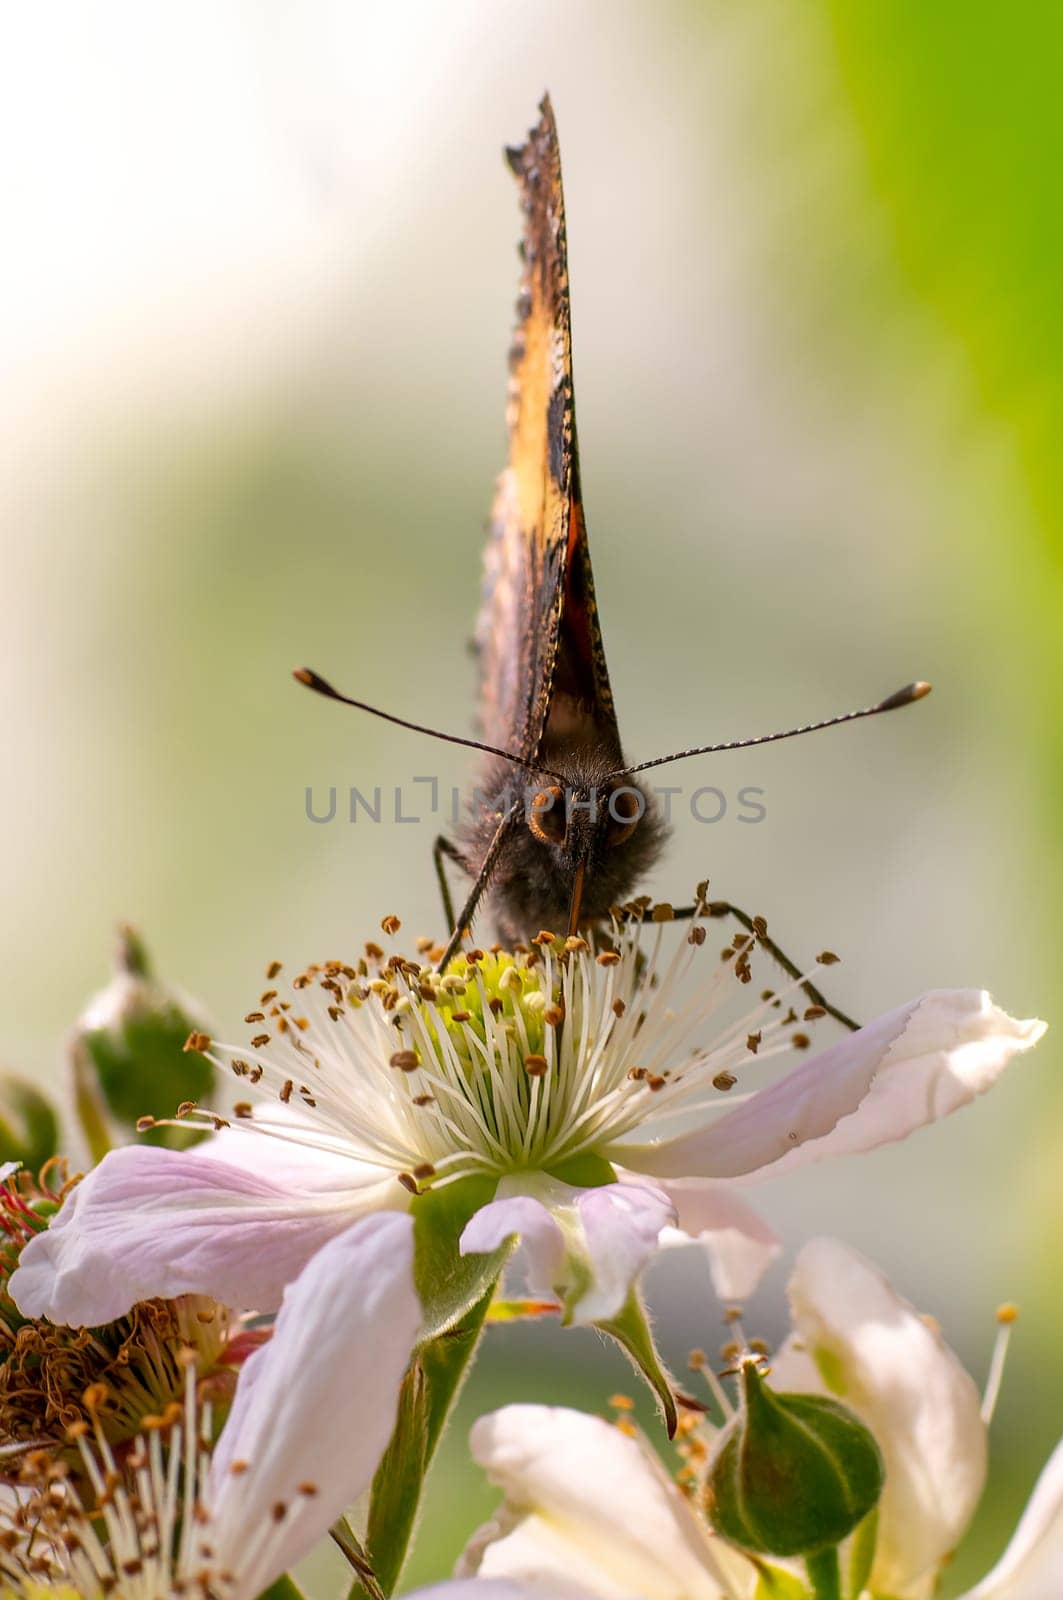 a butterfly sits on a flower and nibbles necktar